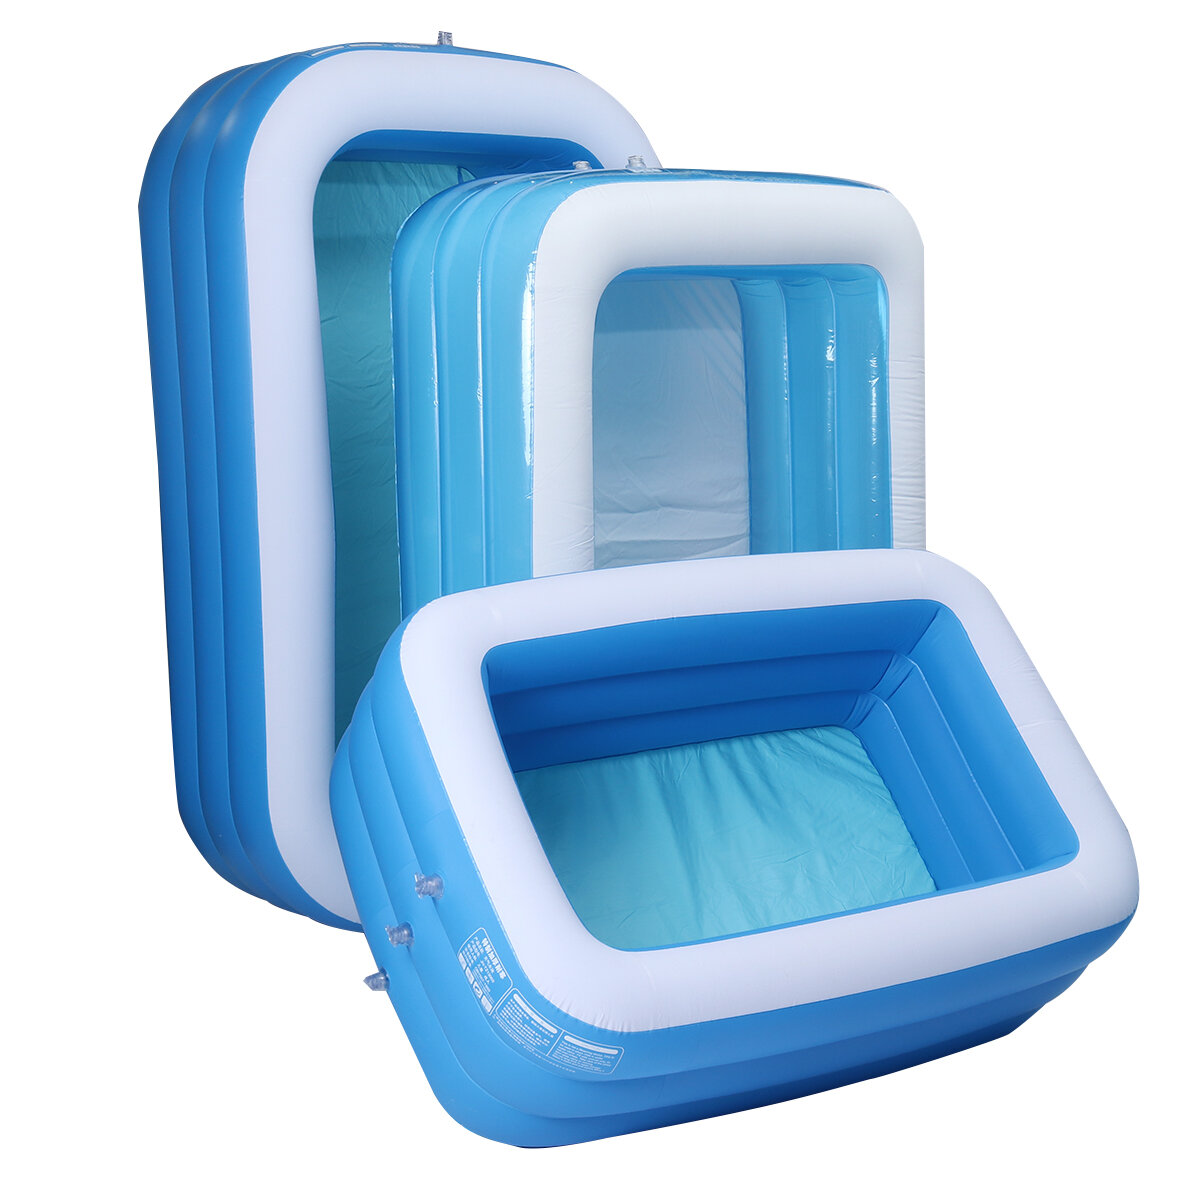 Children's Inflatable Swimming Pool Square Thickened Ocean Ball Pool Outdoor Home Baby Family Pool Children's Gifts